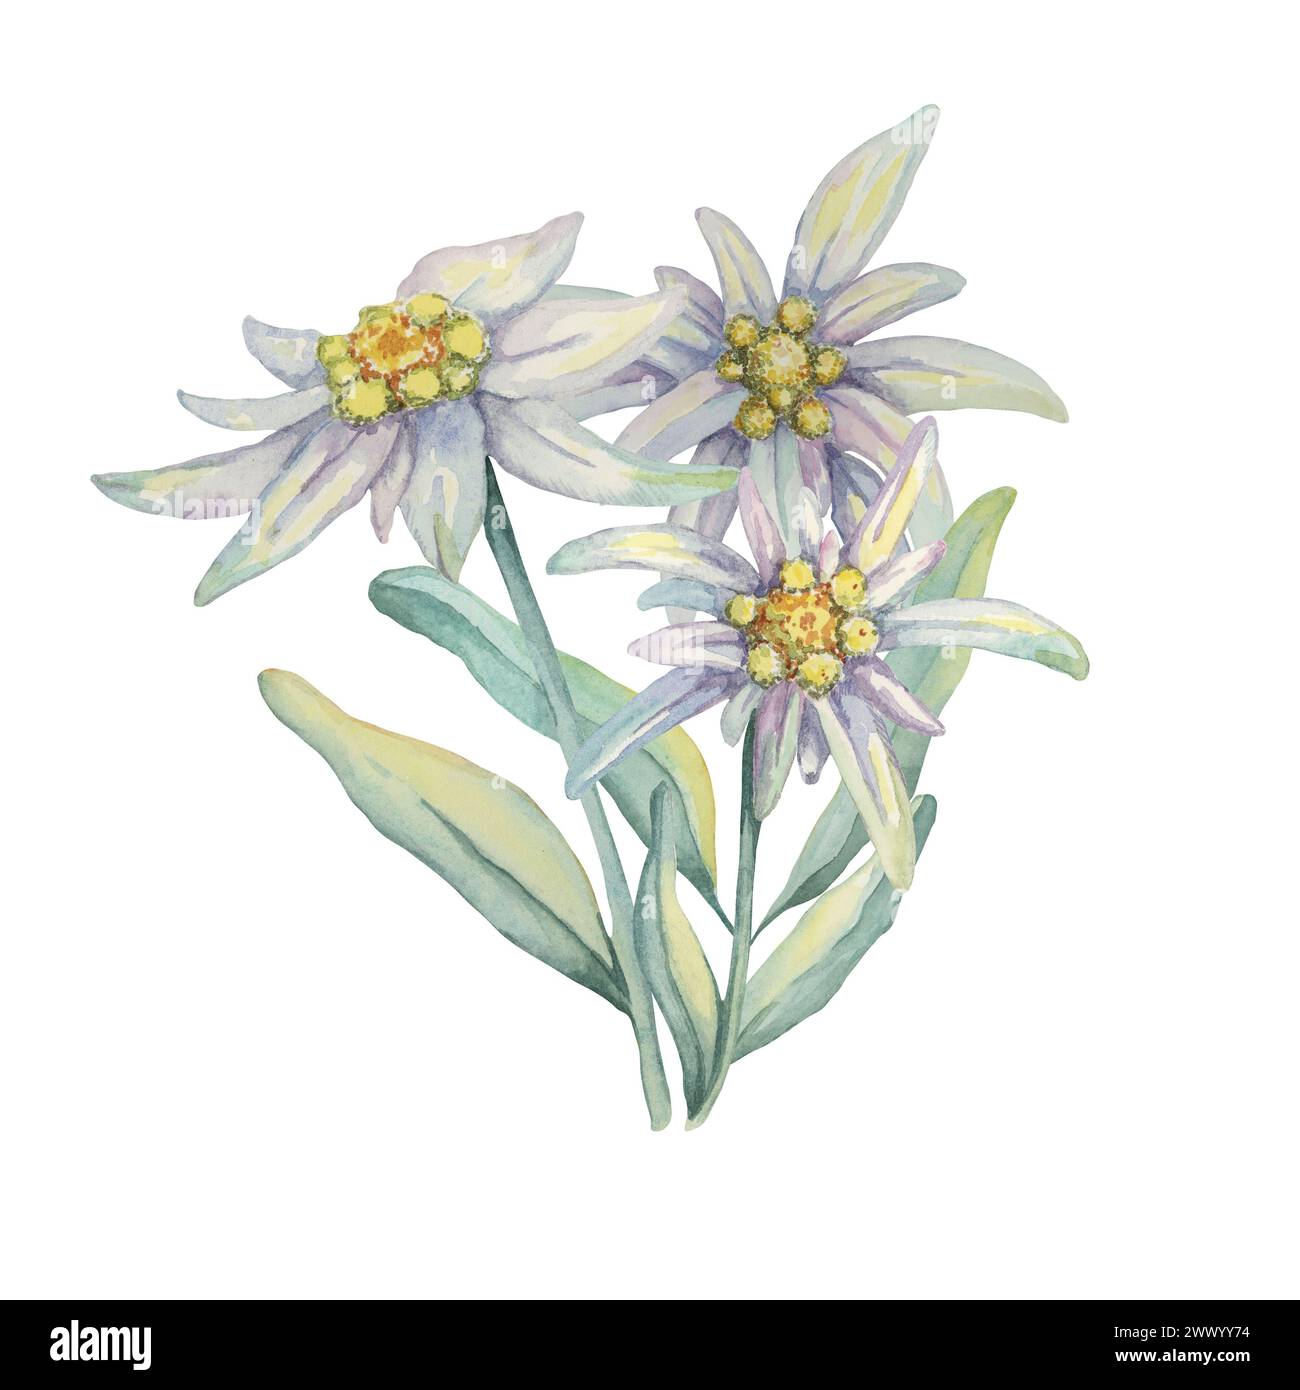 Edelweiss bouquet clipart. Watercolor illustration with white flowers and leaves. Leontopodium nivale hand drawn artwork isolated on white background. Design for printing, cards, apparel, stickers. Stock Photo